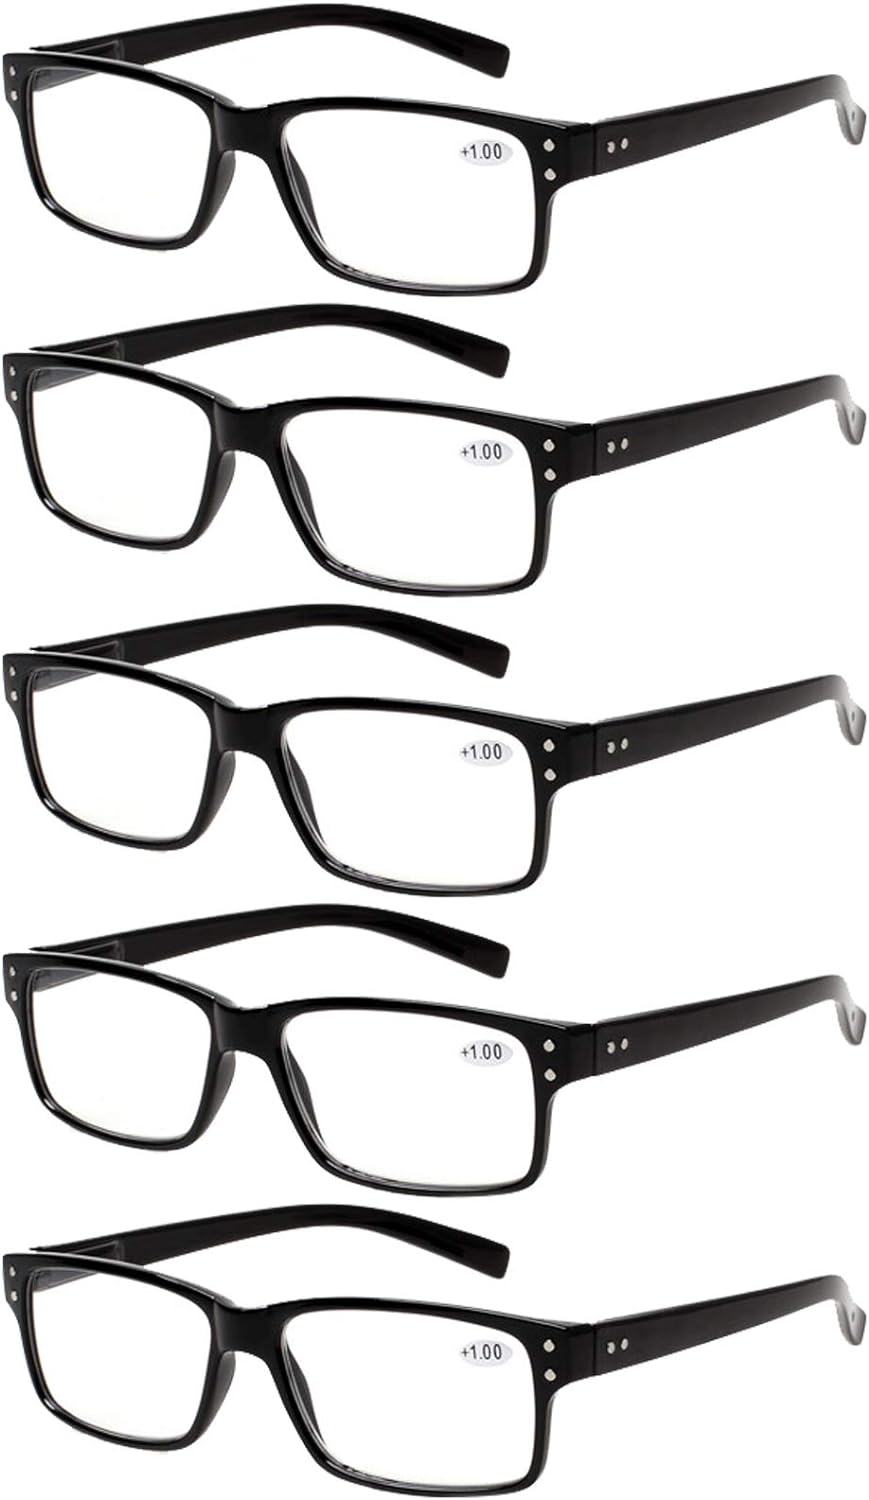 Reading Glasses 5 Pairs Quality Readers Spring Hinge Glasses for Reading for Men and Women